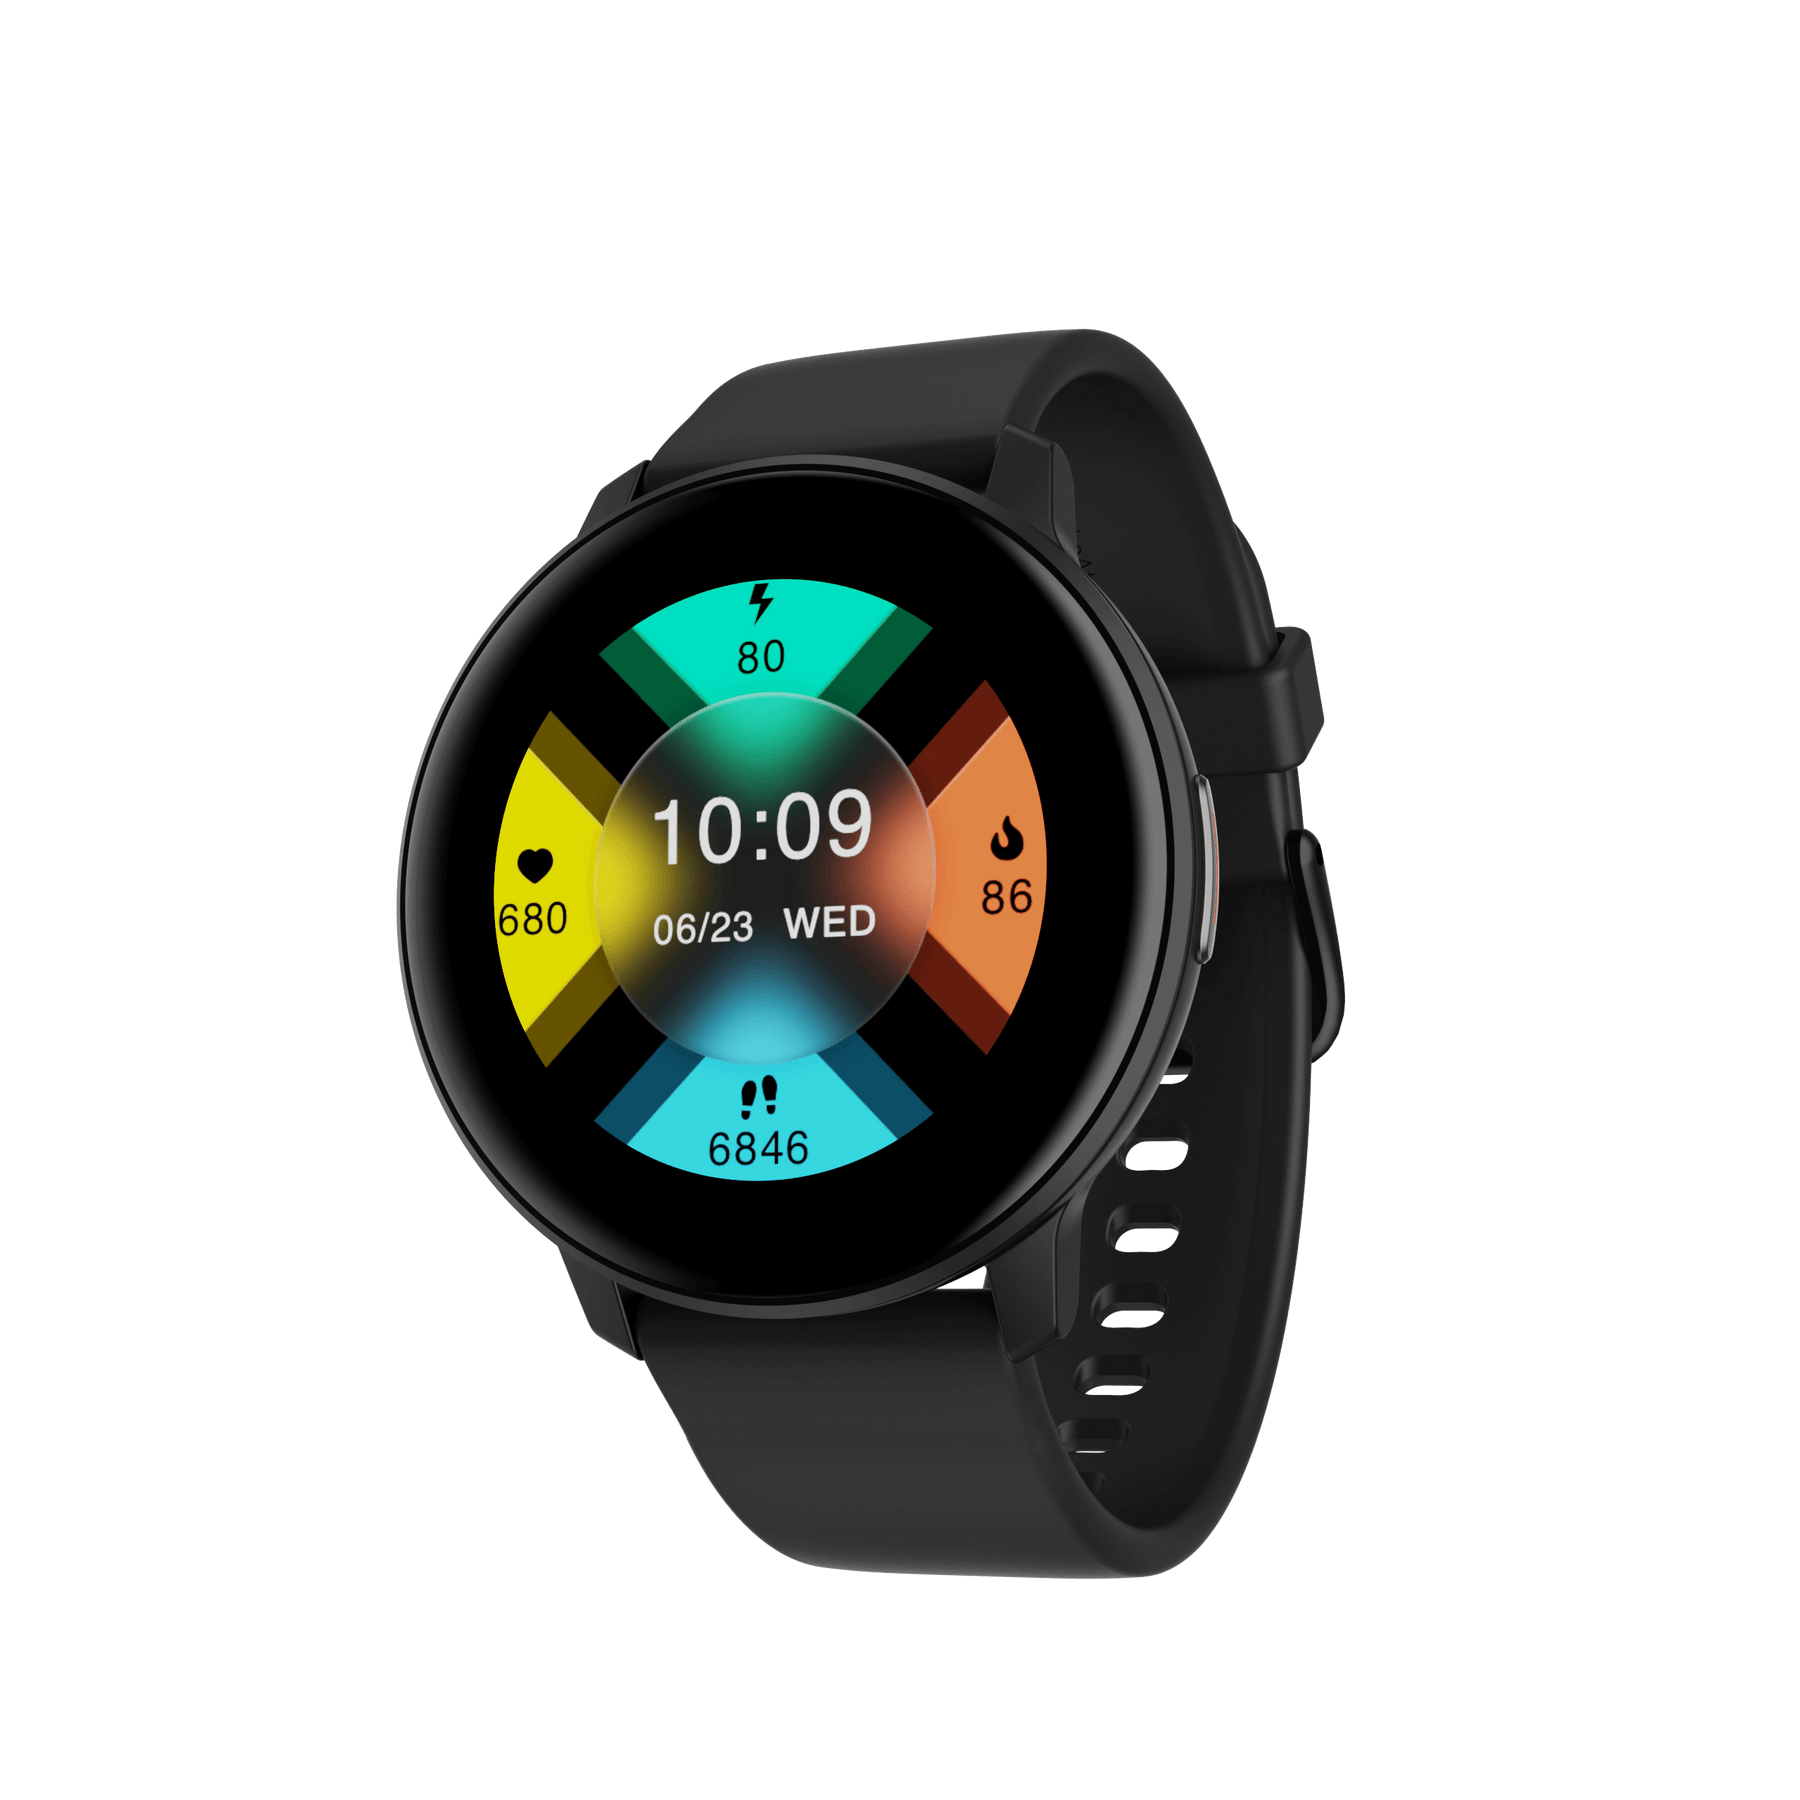 Boat launches its first 4G calling smartwatch, Boat Lunar Pro LTE: Price  and other details - Times of India